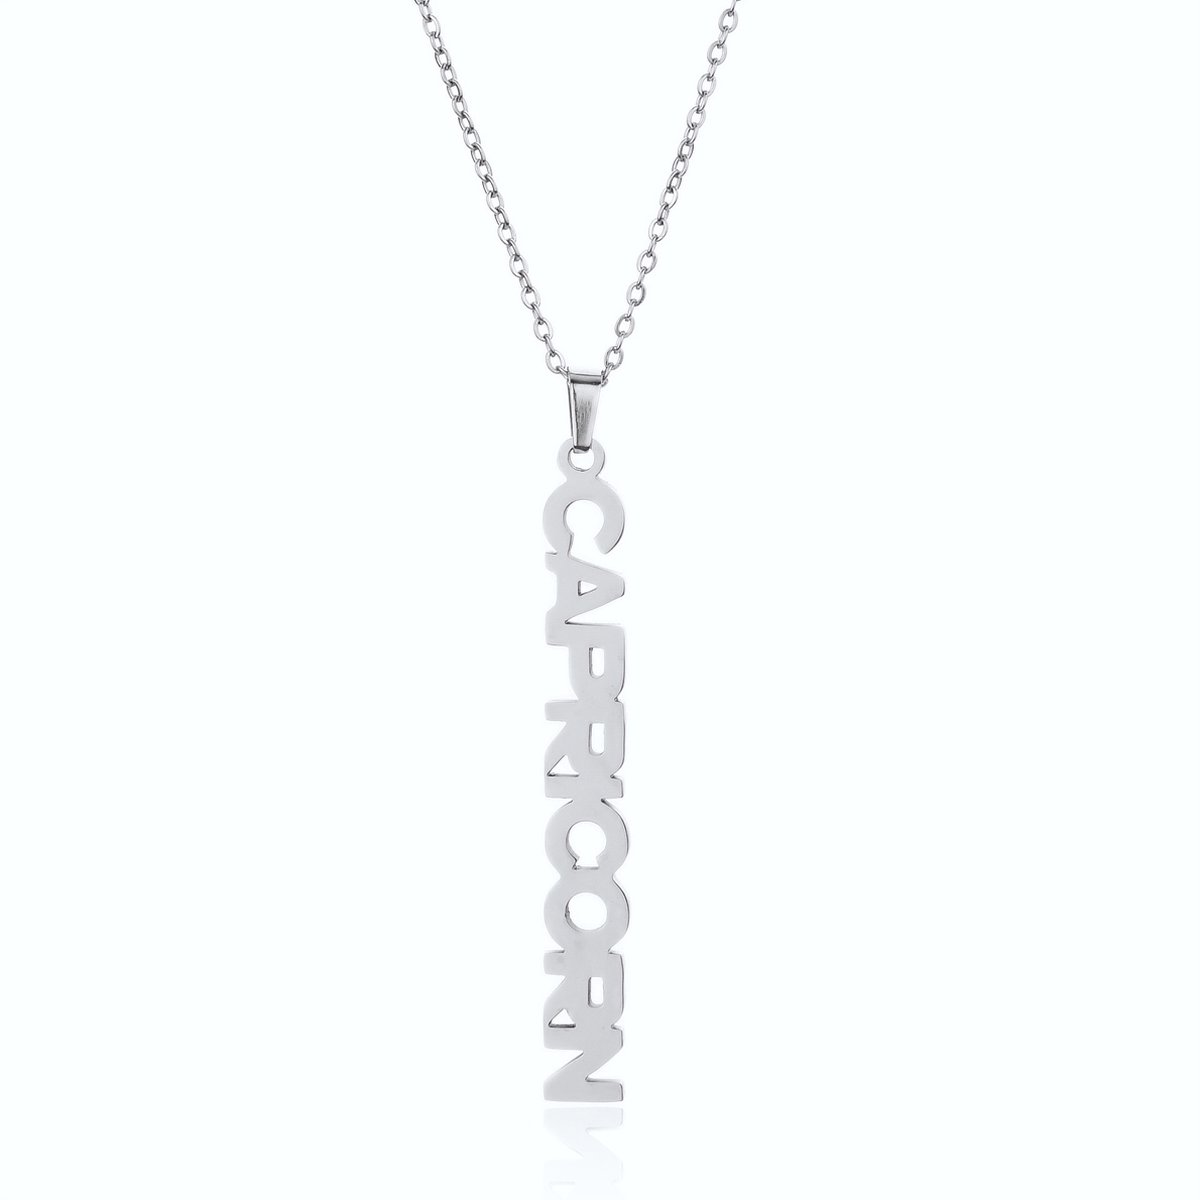 ICYBOY 18K Roestvrije Stalen Ketting Met Zodiac Sterrenbeeld Letters Pendant [Steenbok] [45 cm] Silver Plating Stainless Steel Letter Necklace Vertical Horoscope Necklace